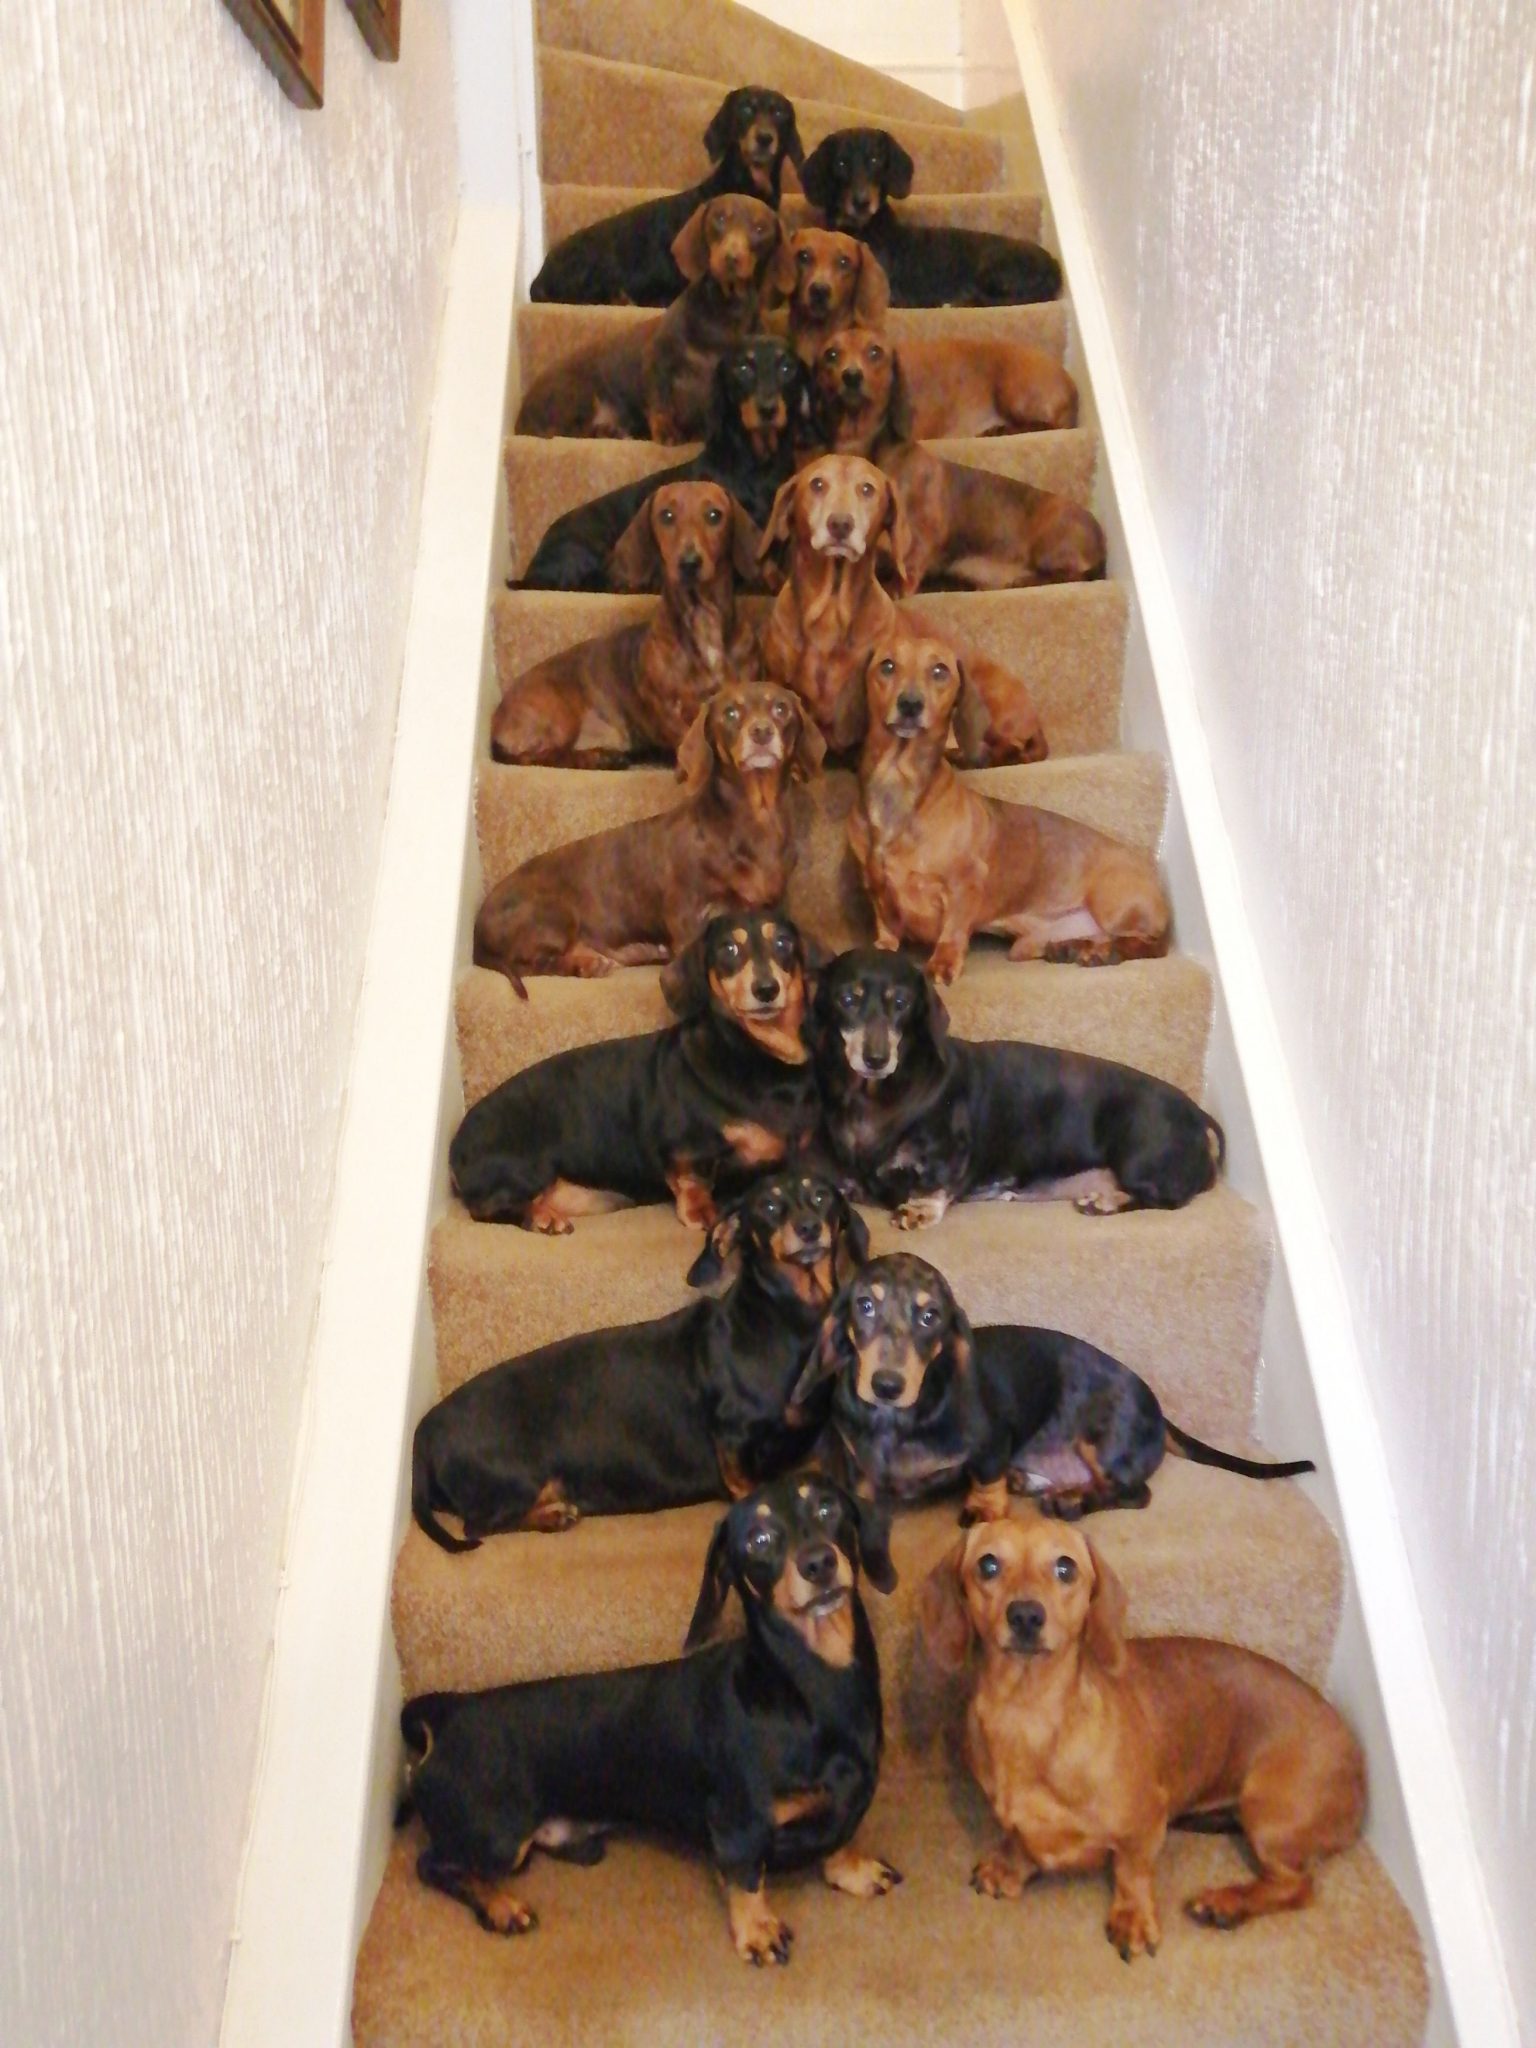 Dog Owner Gets His 17 Dachshunds To Pose For Festive Holiday Photo